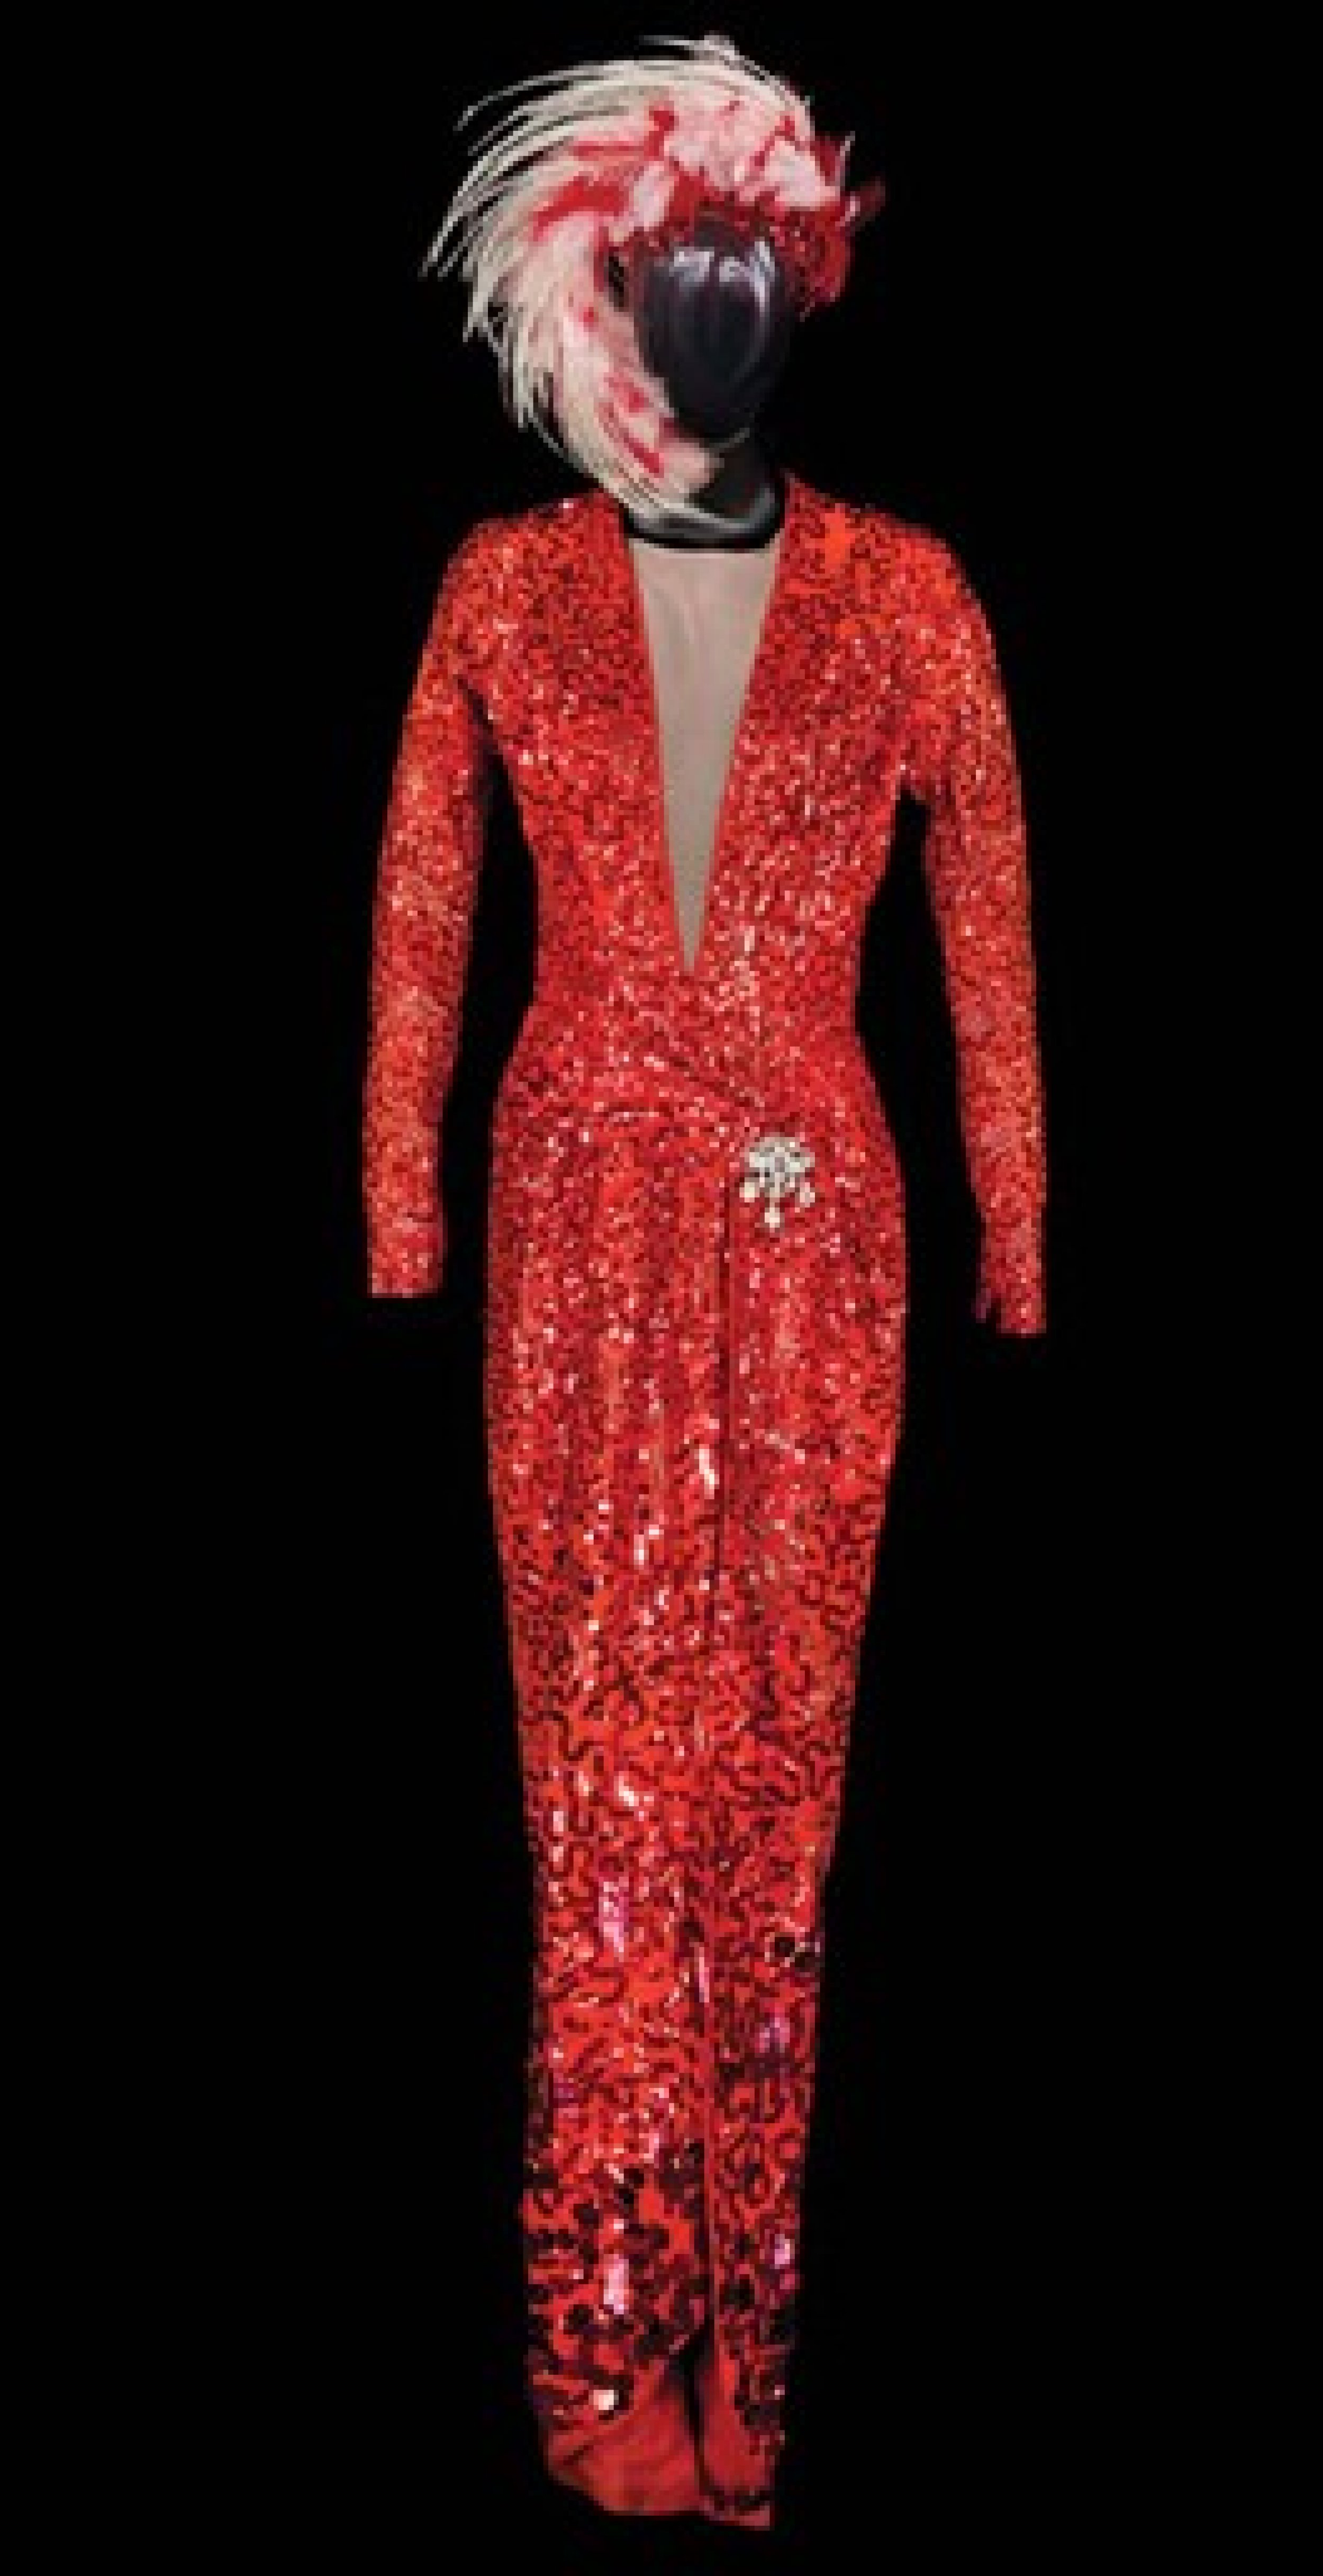 The red sequined dress and feathered headdress worn by Monroe in Gentlemen Prefer Blondes.